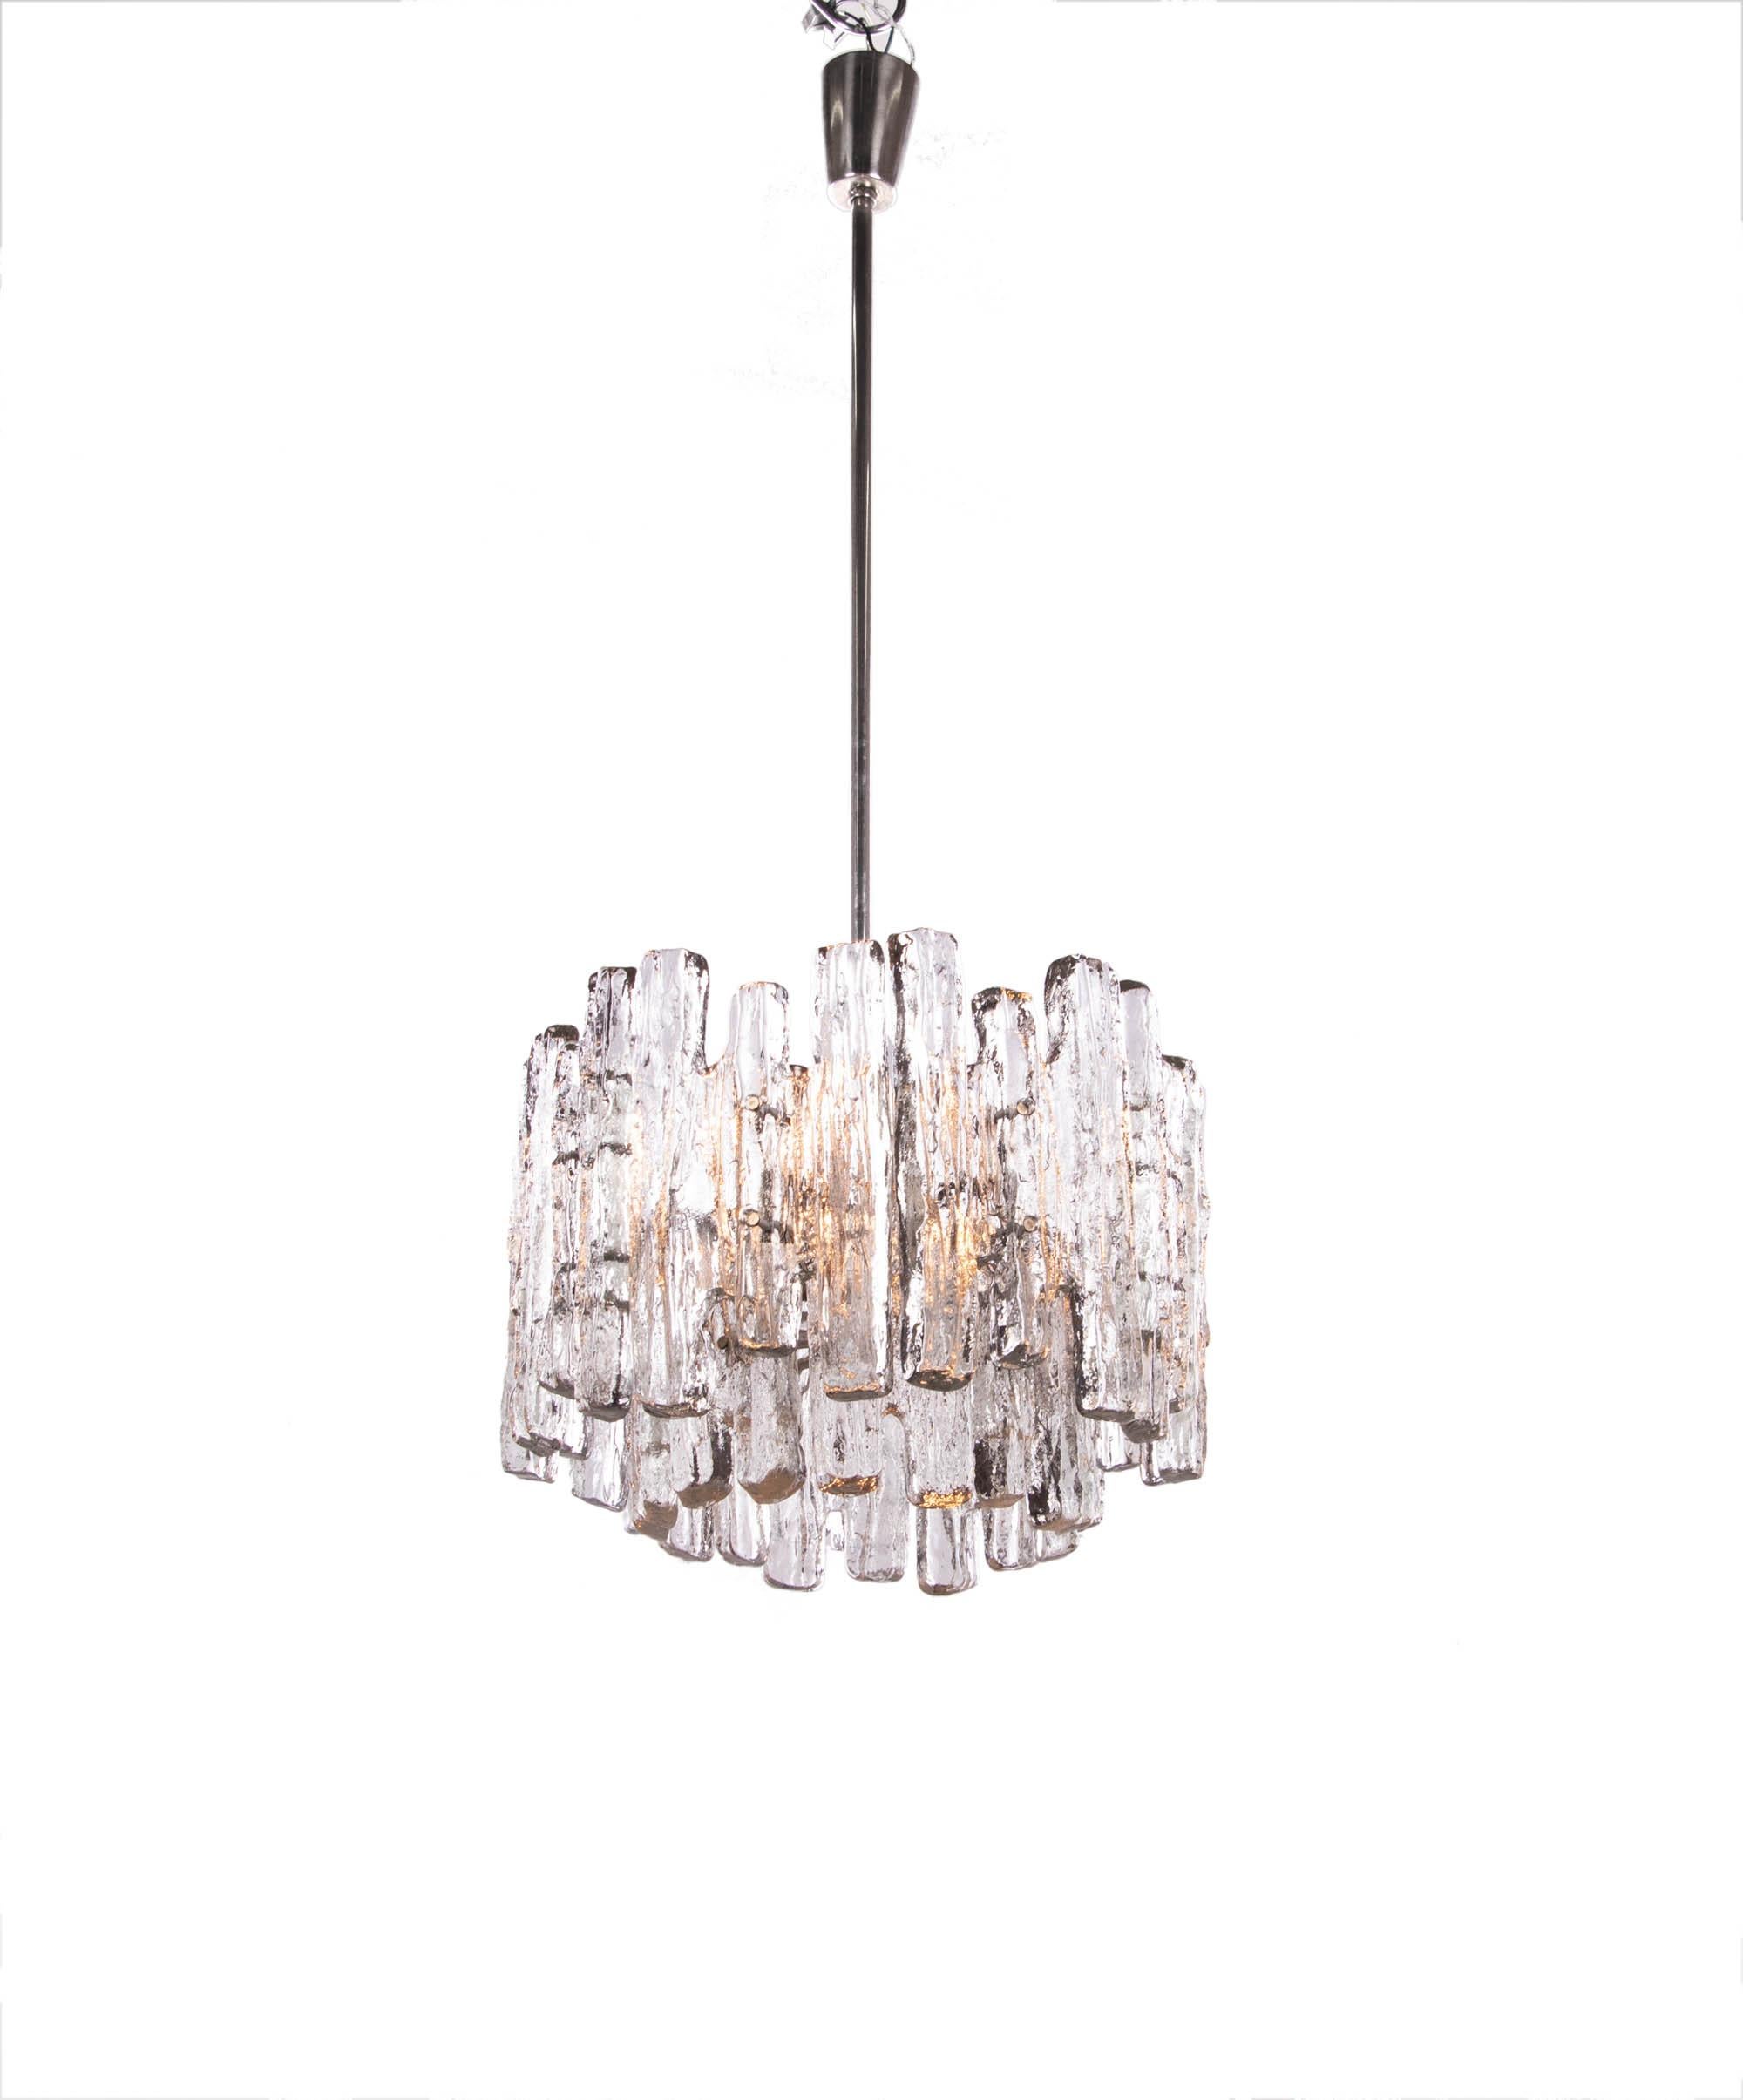 Elegant chandelier with two tiers of iced Murano glass elements on a nickel stem and hardware designed by J.T. Kalmar. Hanging glass resembles icicles. Chandelier illuminates beautifully and offers a lot of light. Manufactured by Kalmar, Vienna,